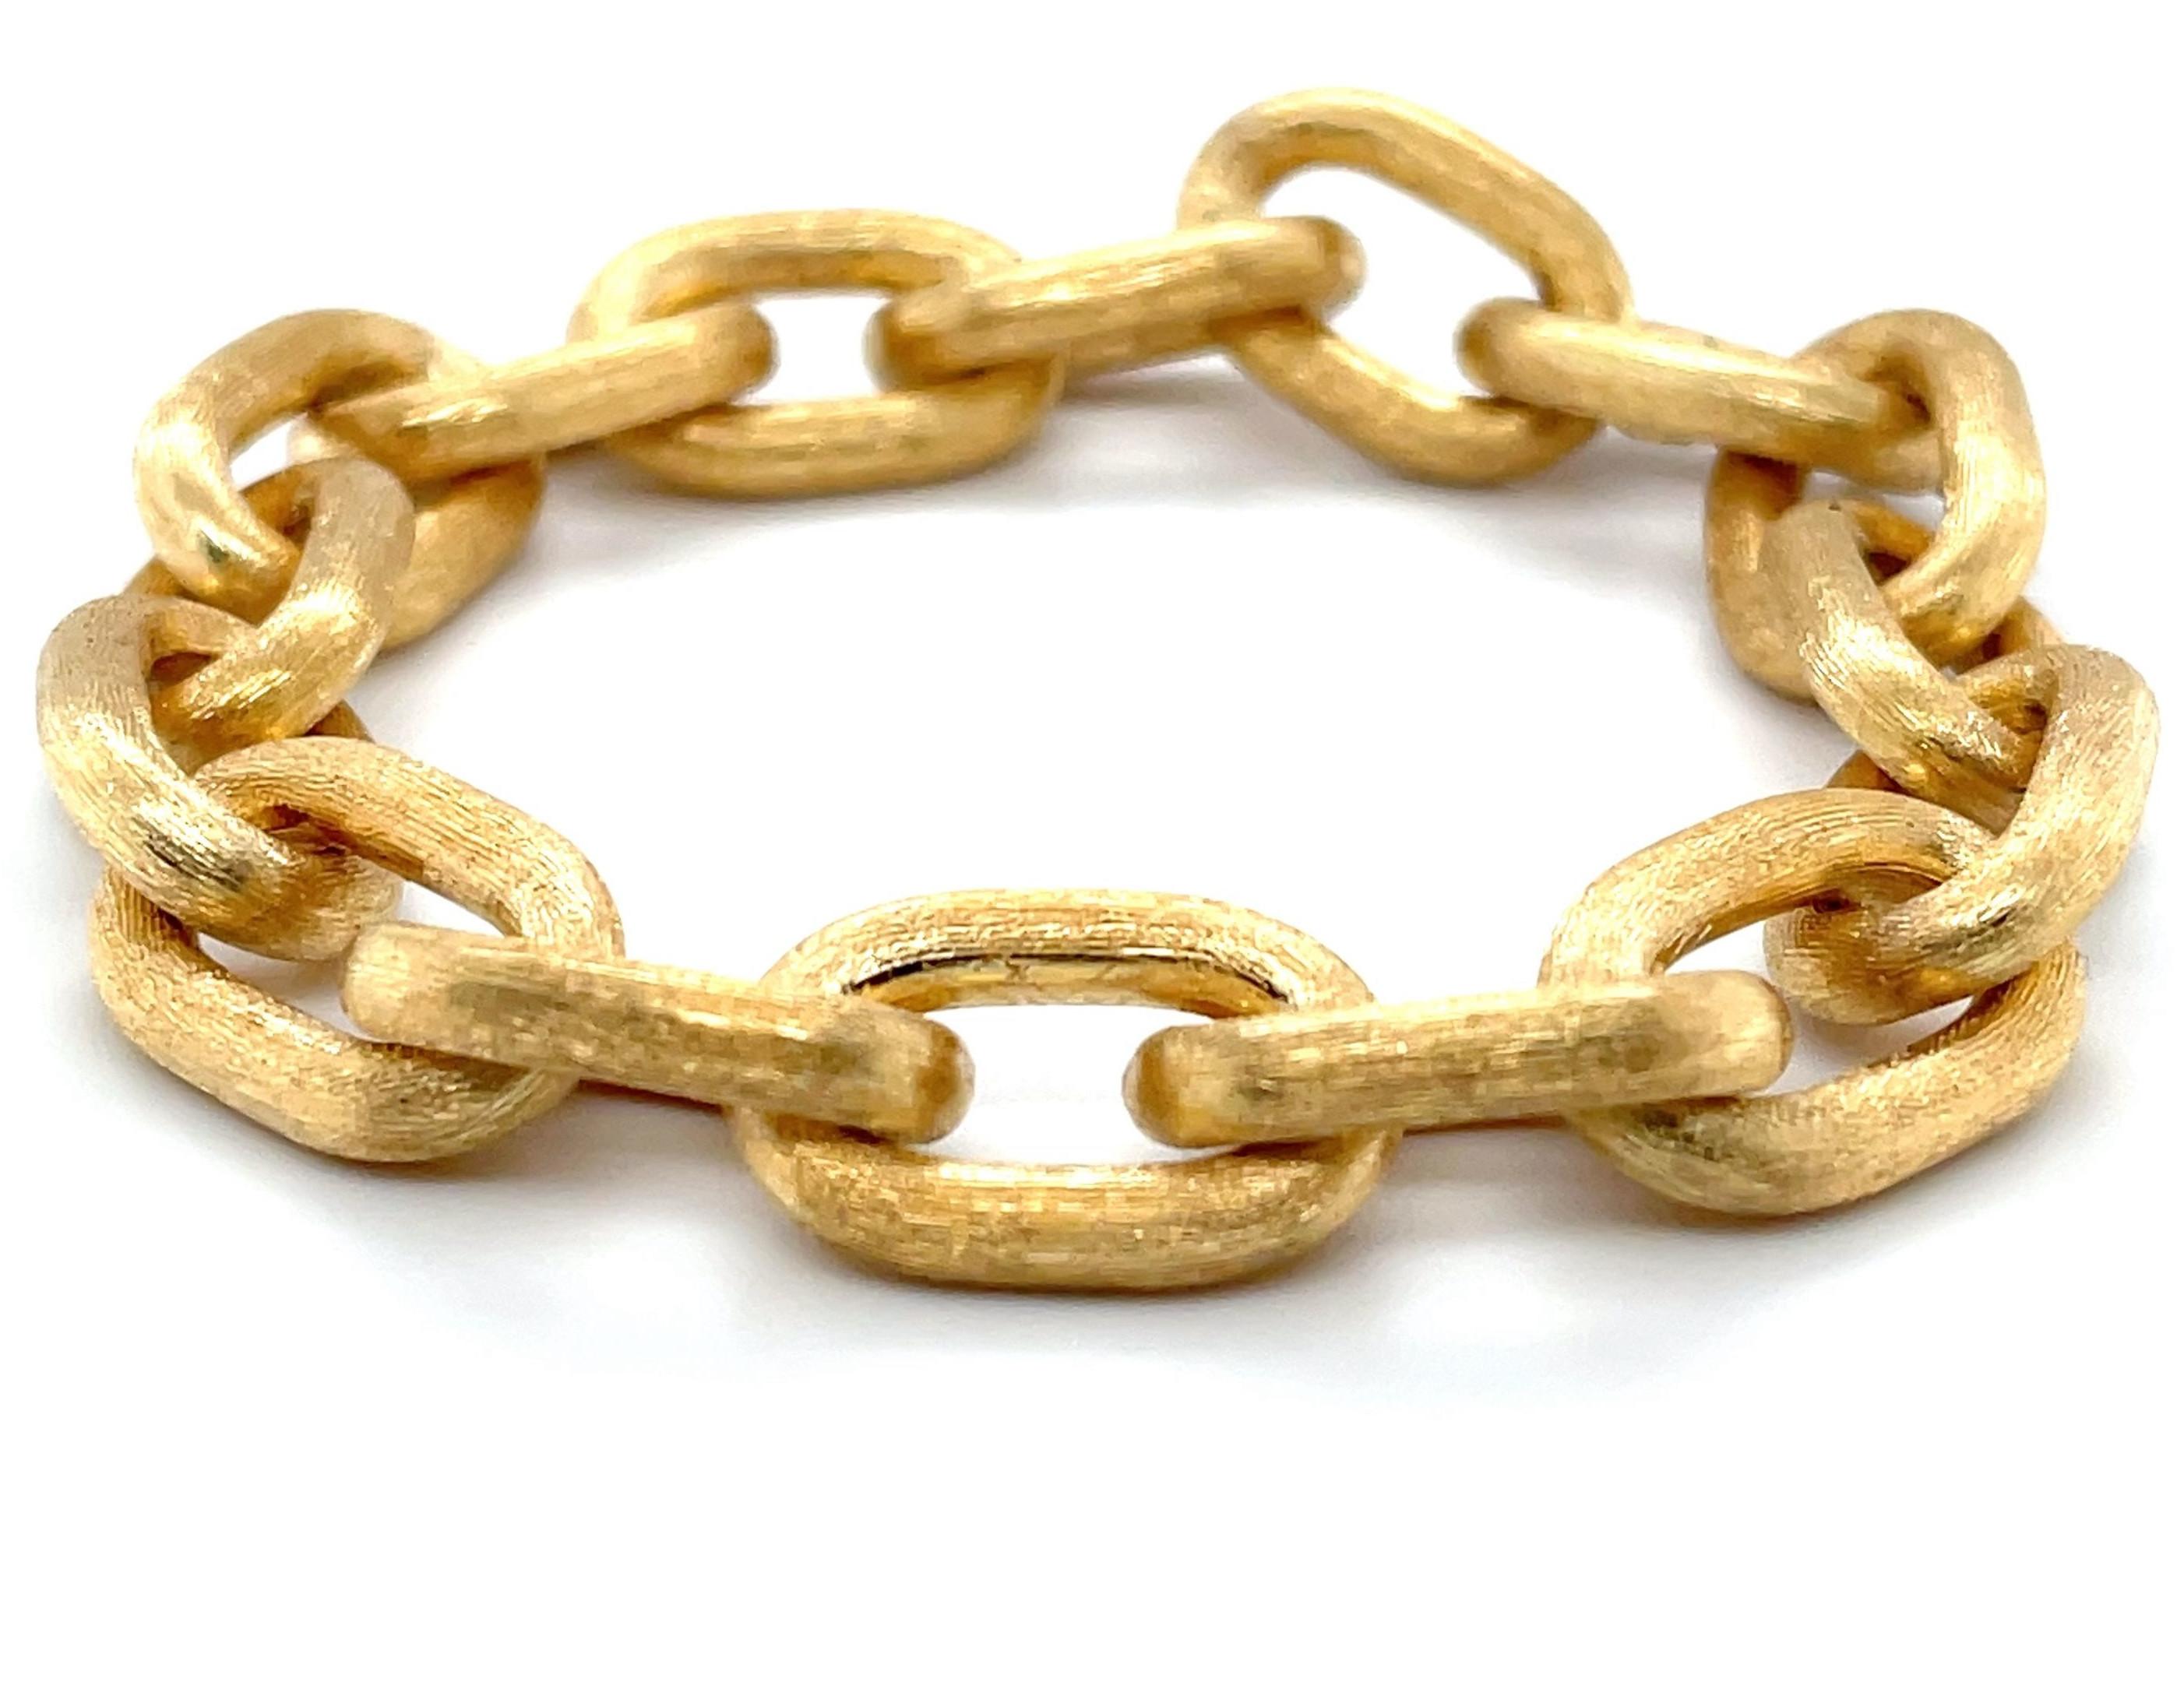 This stunning 18k yellow gold bracelet has an impressive, substantial appearance and is beautifully comfortable to wear! The invisible hinged clasp is complete with a safety catch and each oversized link has an elegant Florentine finish for a truly